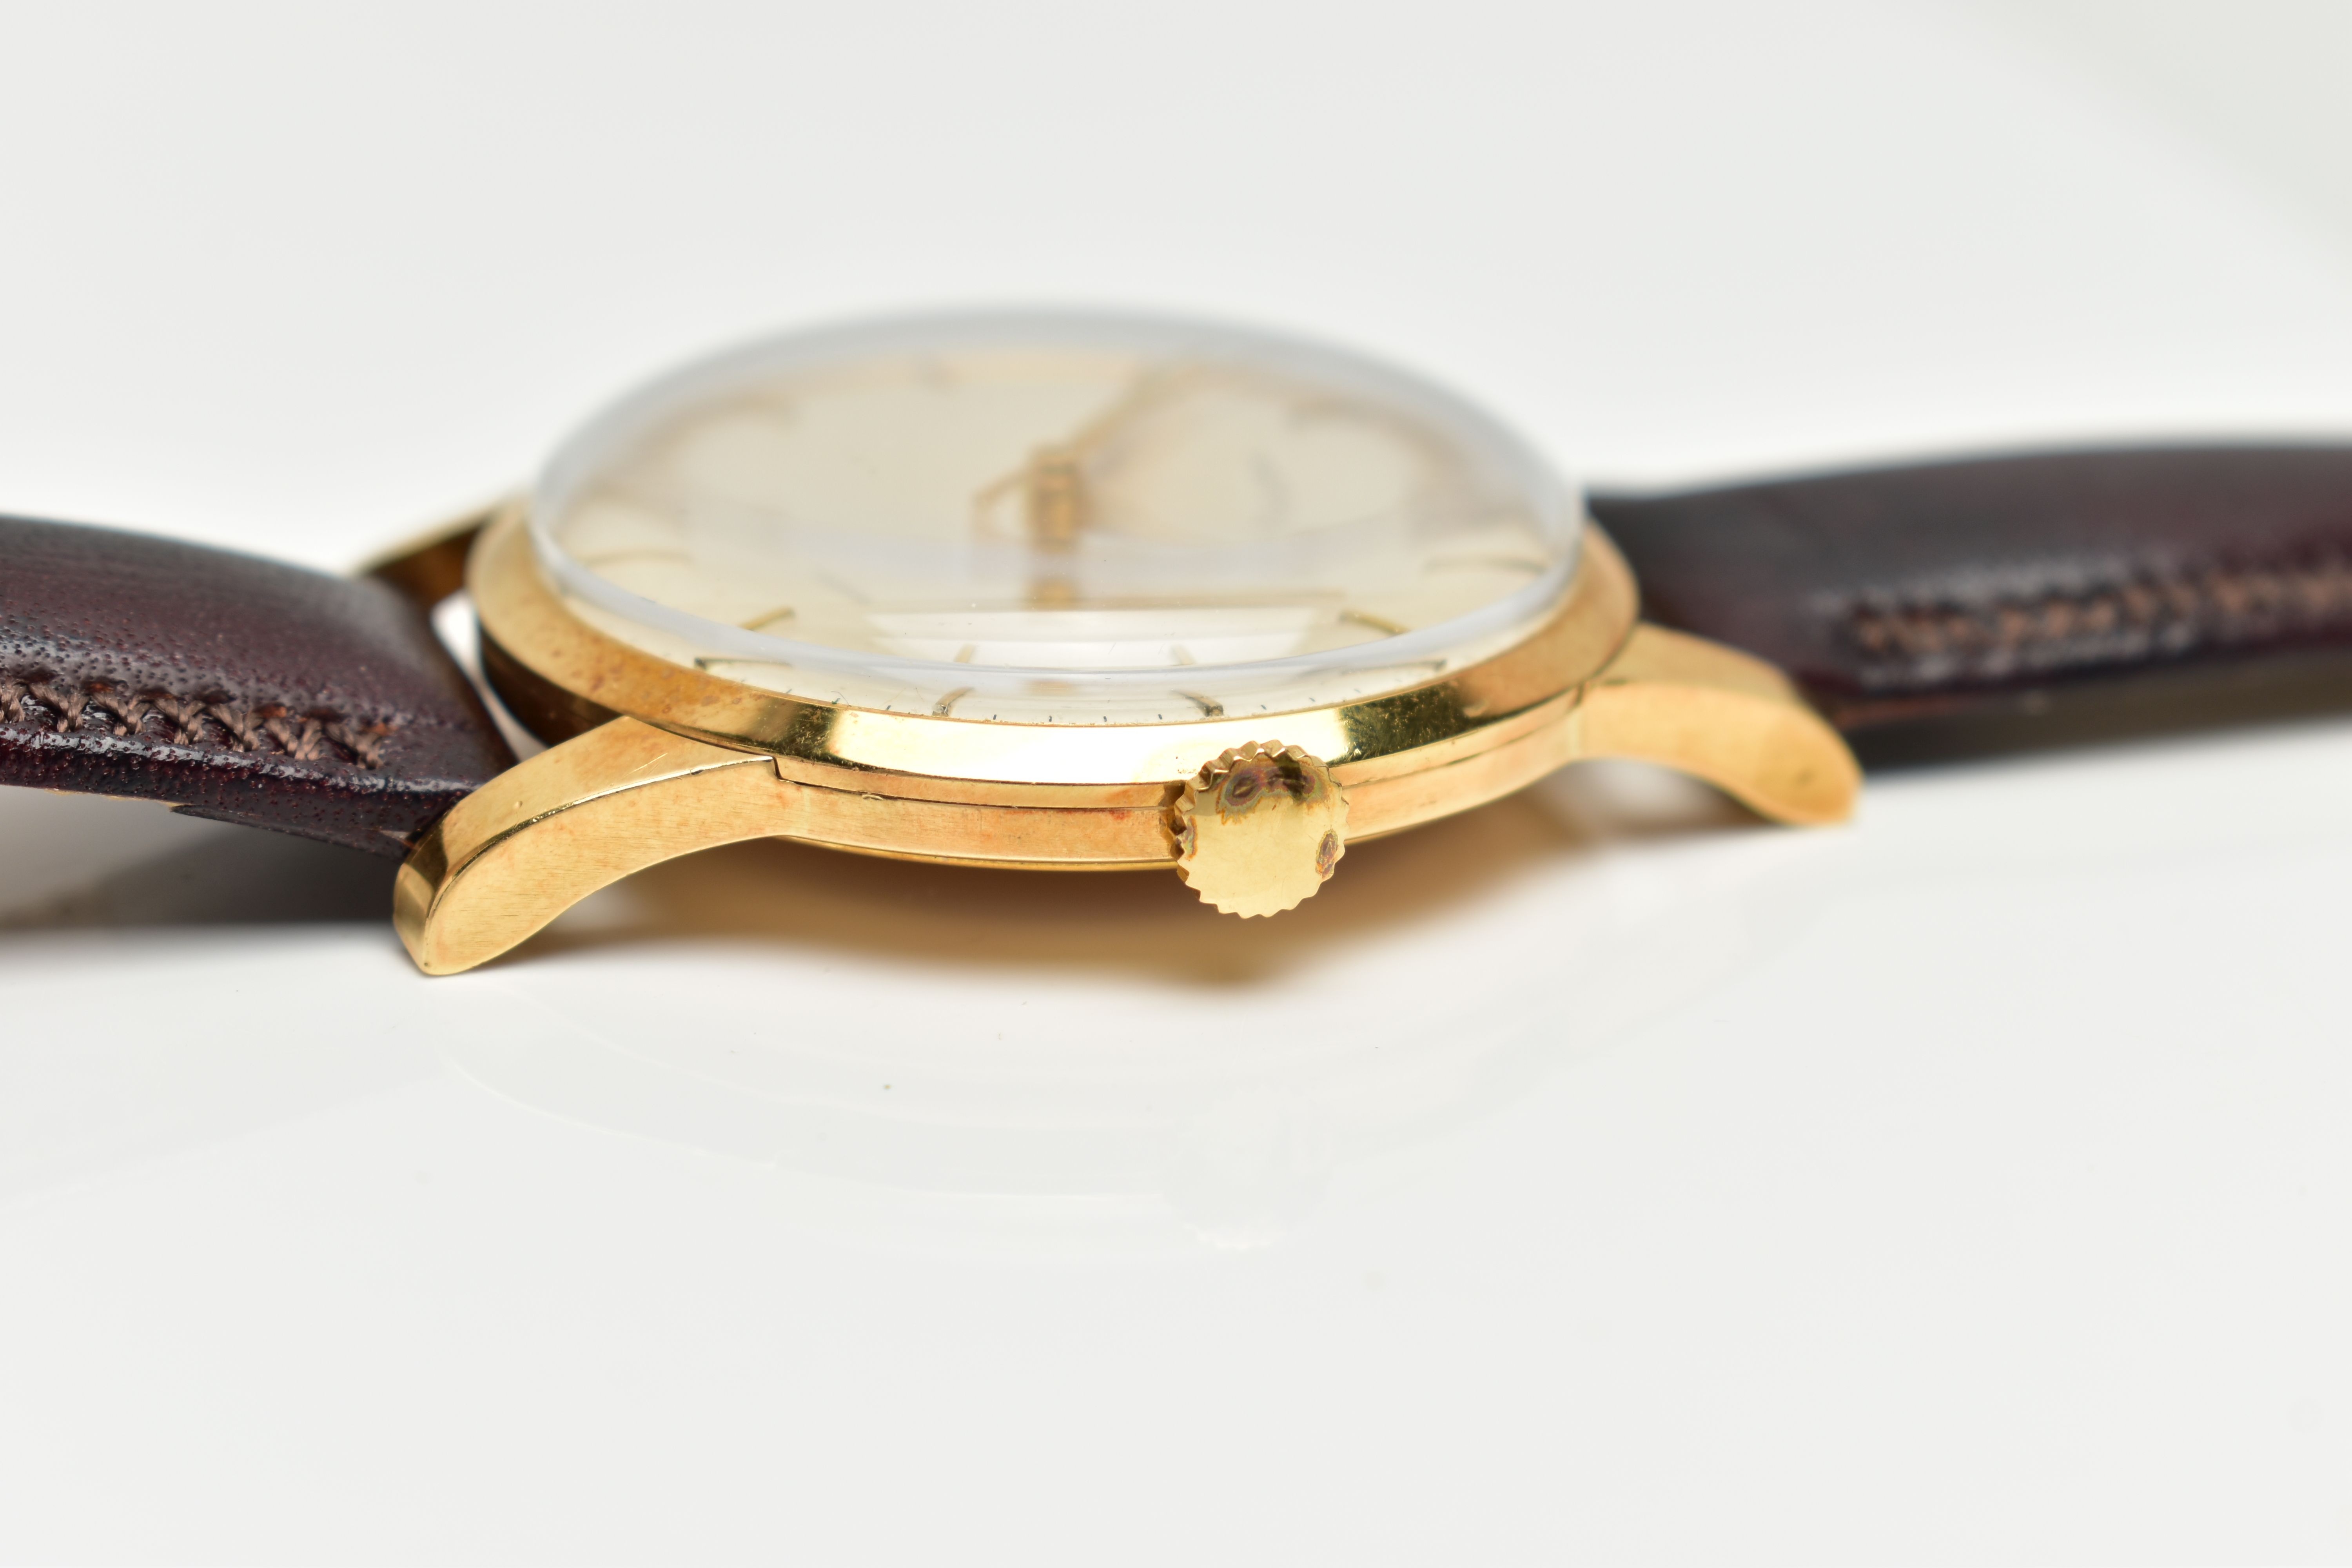 AN 18CT GOLD GENTS 'ROLEX, PRECISION' WRISTWATCH, hand wound movement, round dial, signed 'Rolex' - Image 7 of 7